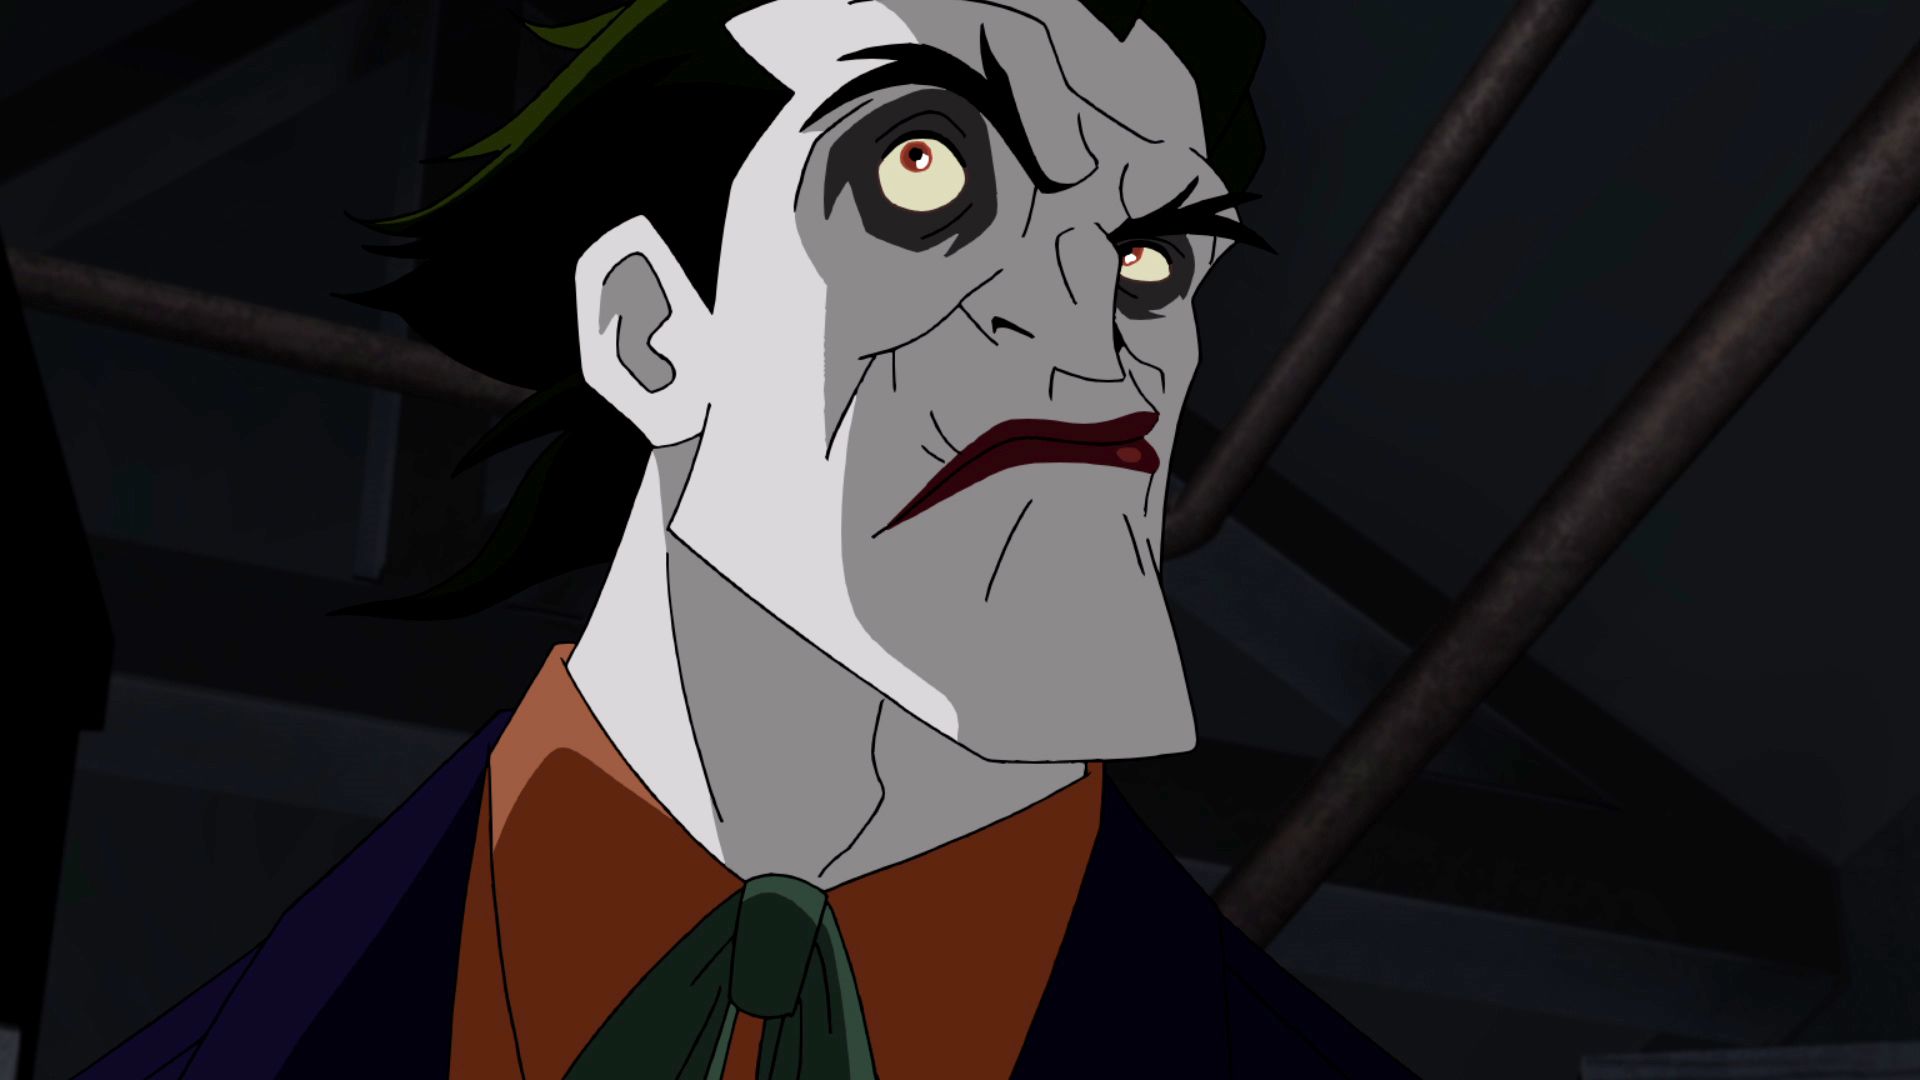 John Di Maggio Talks About Voicing The Joker in Batman: Under the Red Hood